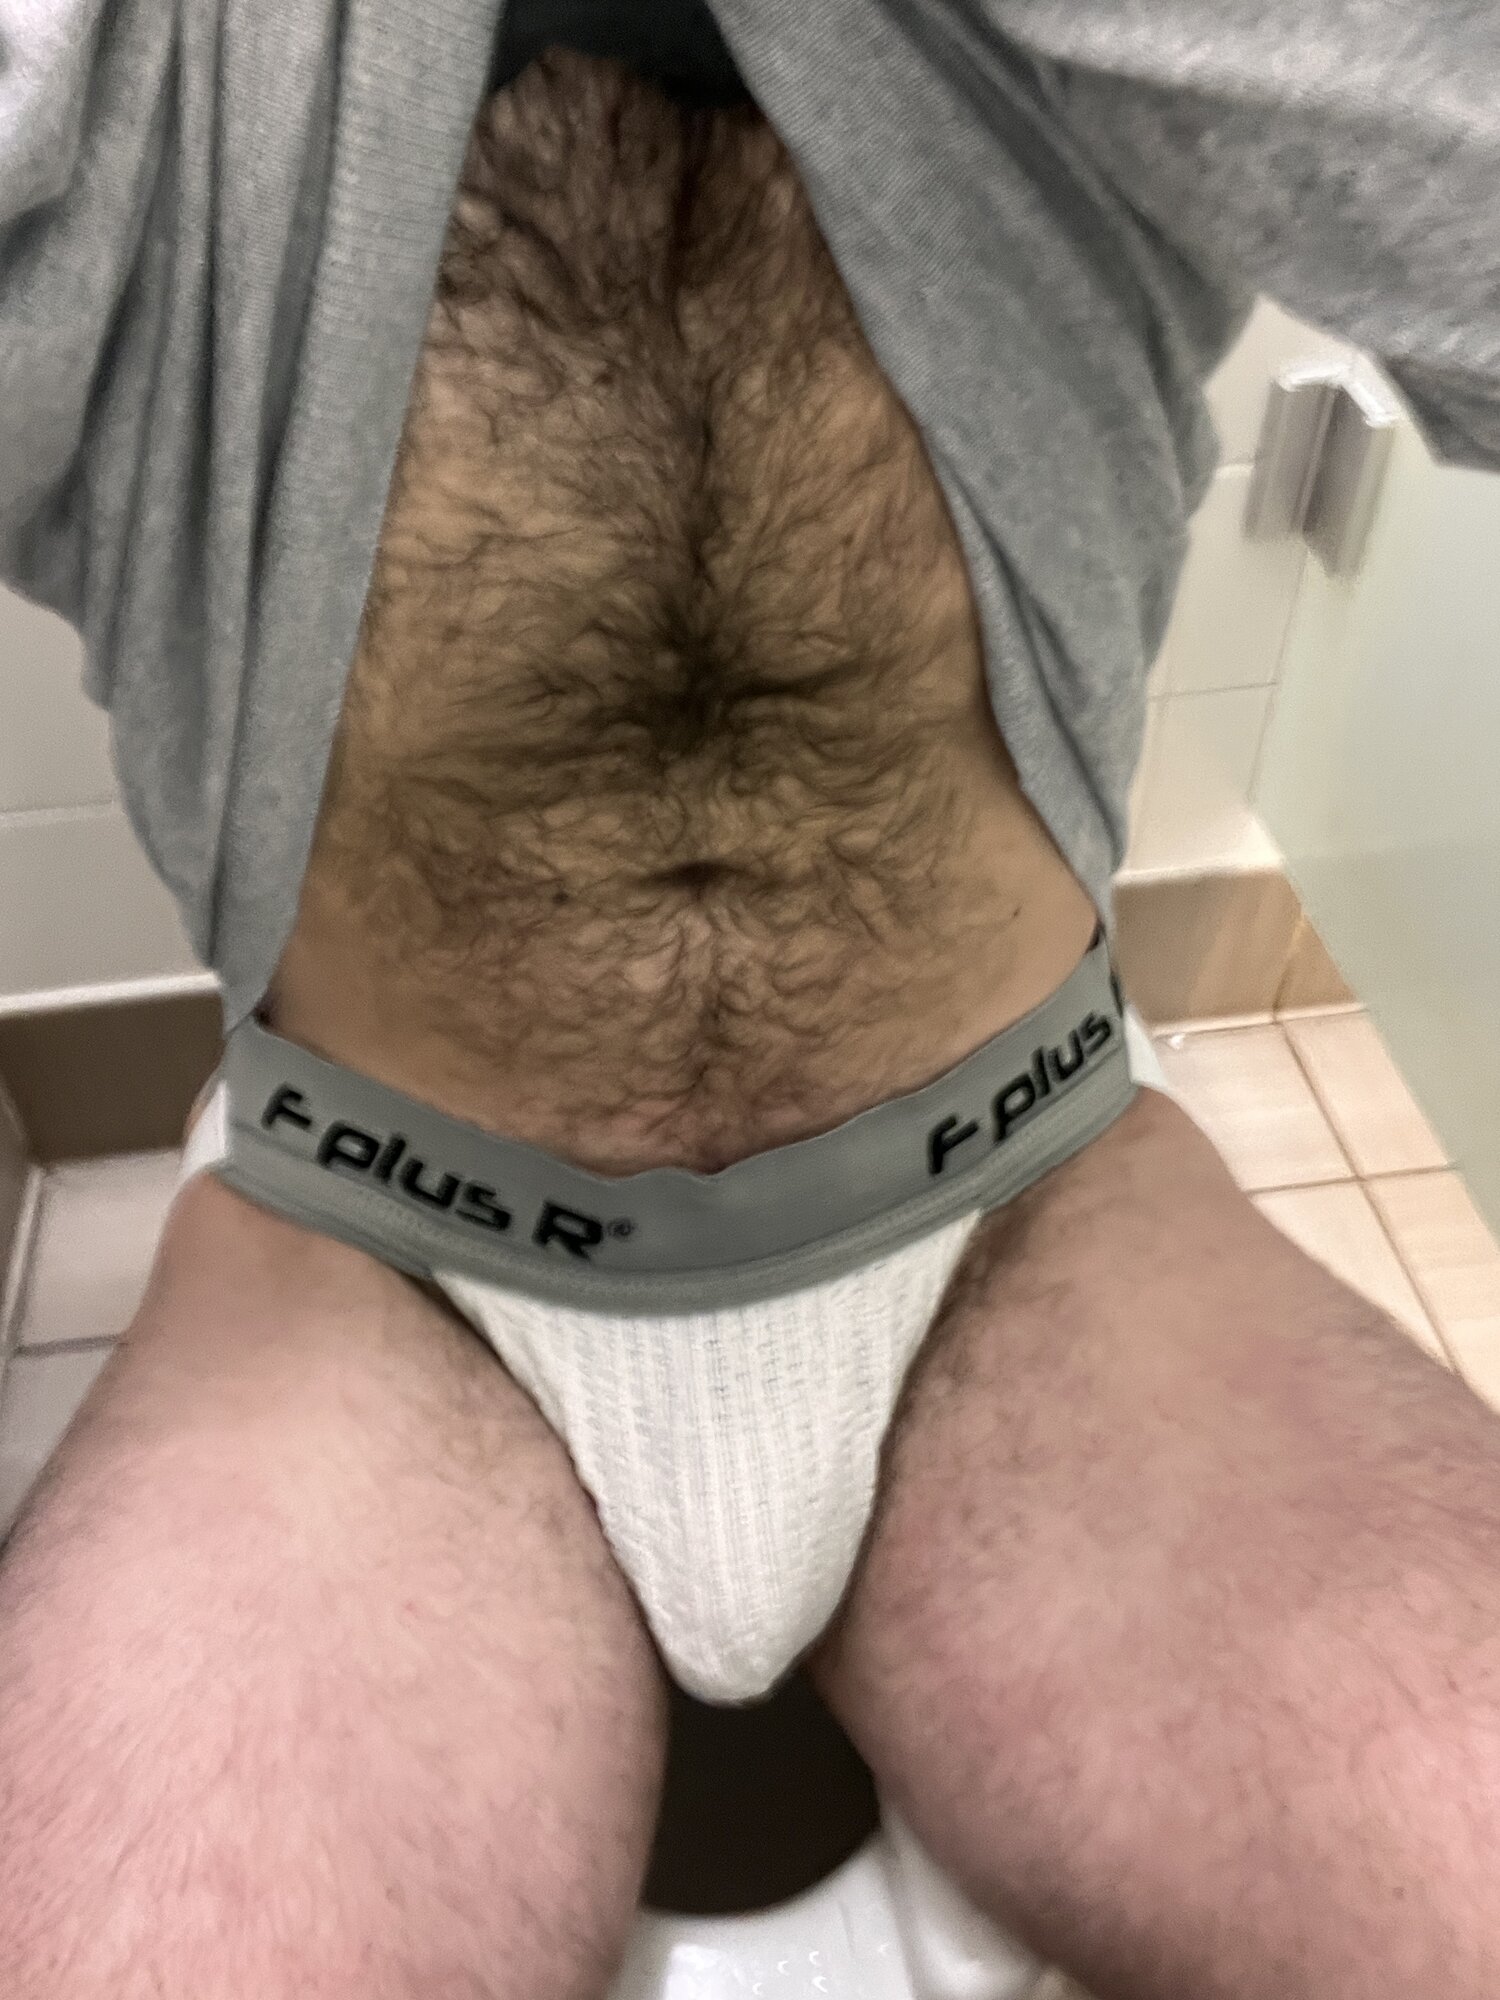 Hard workout = soaking wet fur and pouch 🐷